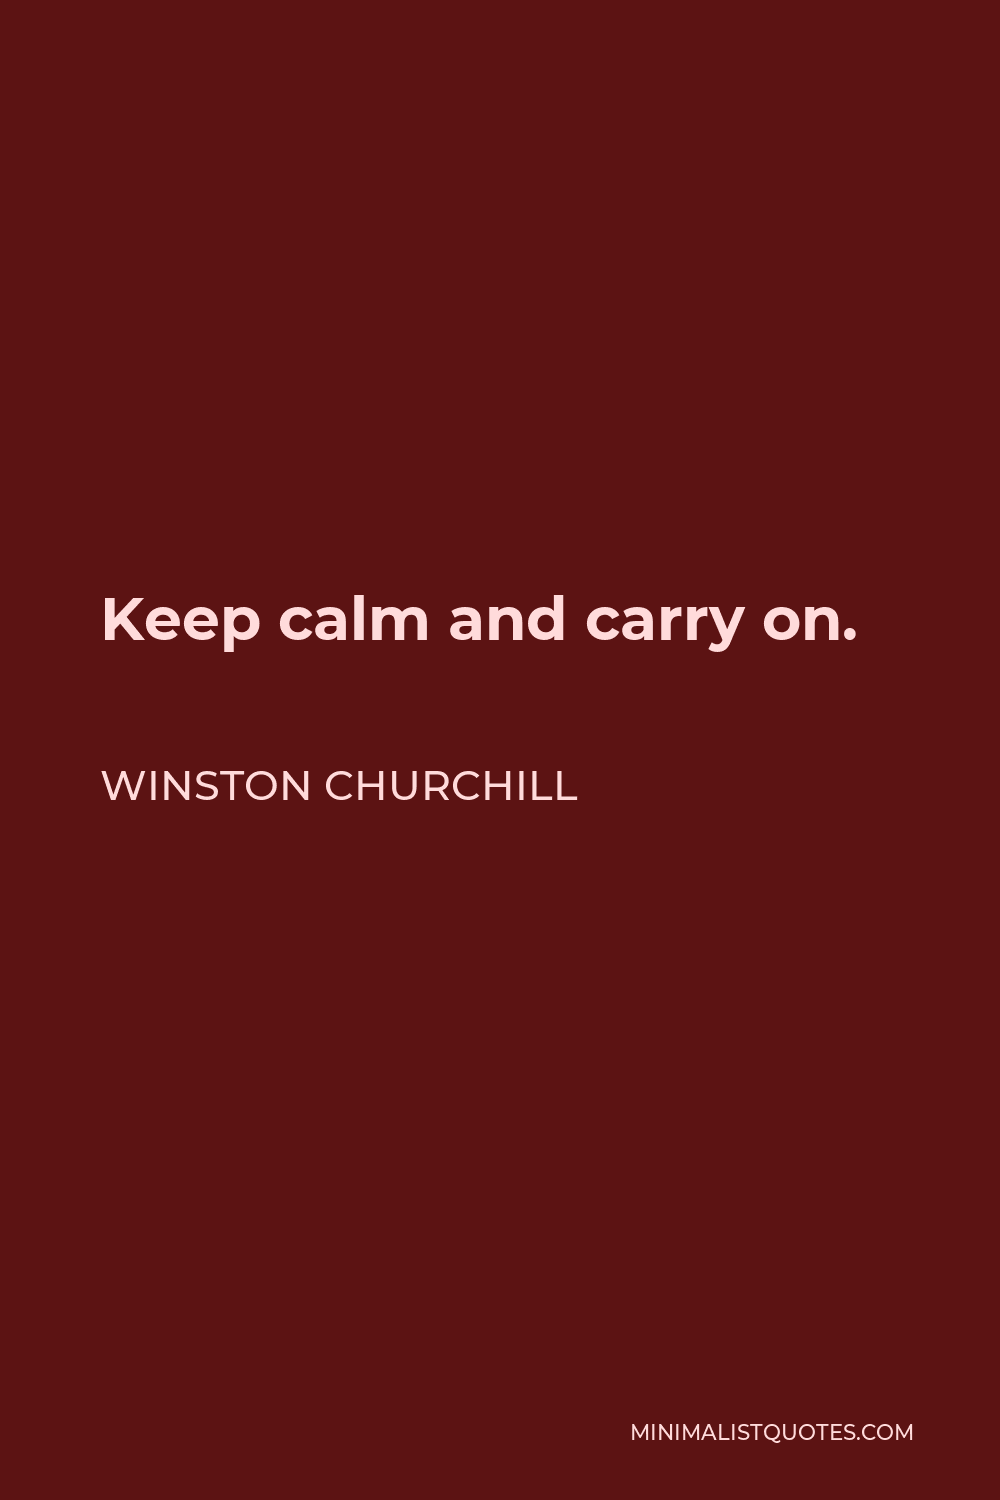 Winston Churchill Quote - Keep calm and carry on.